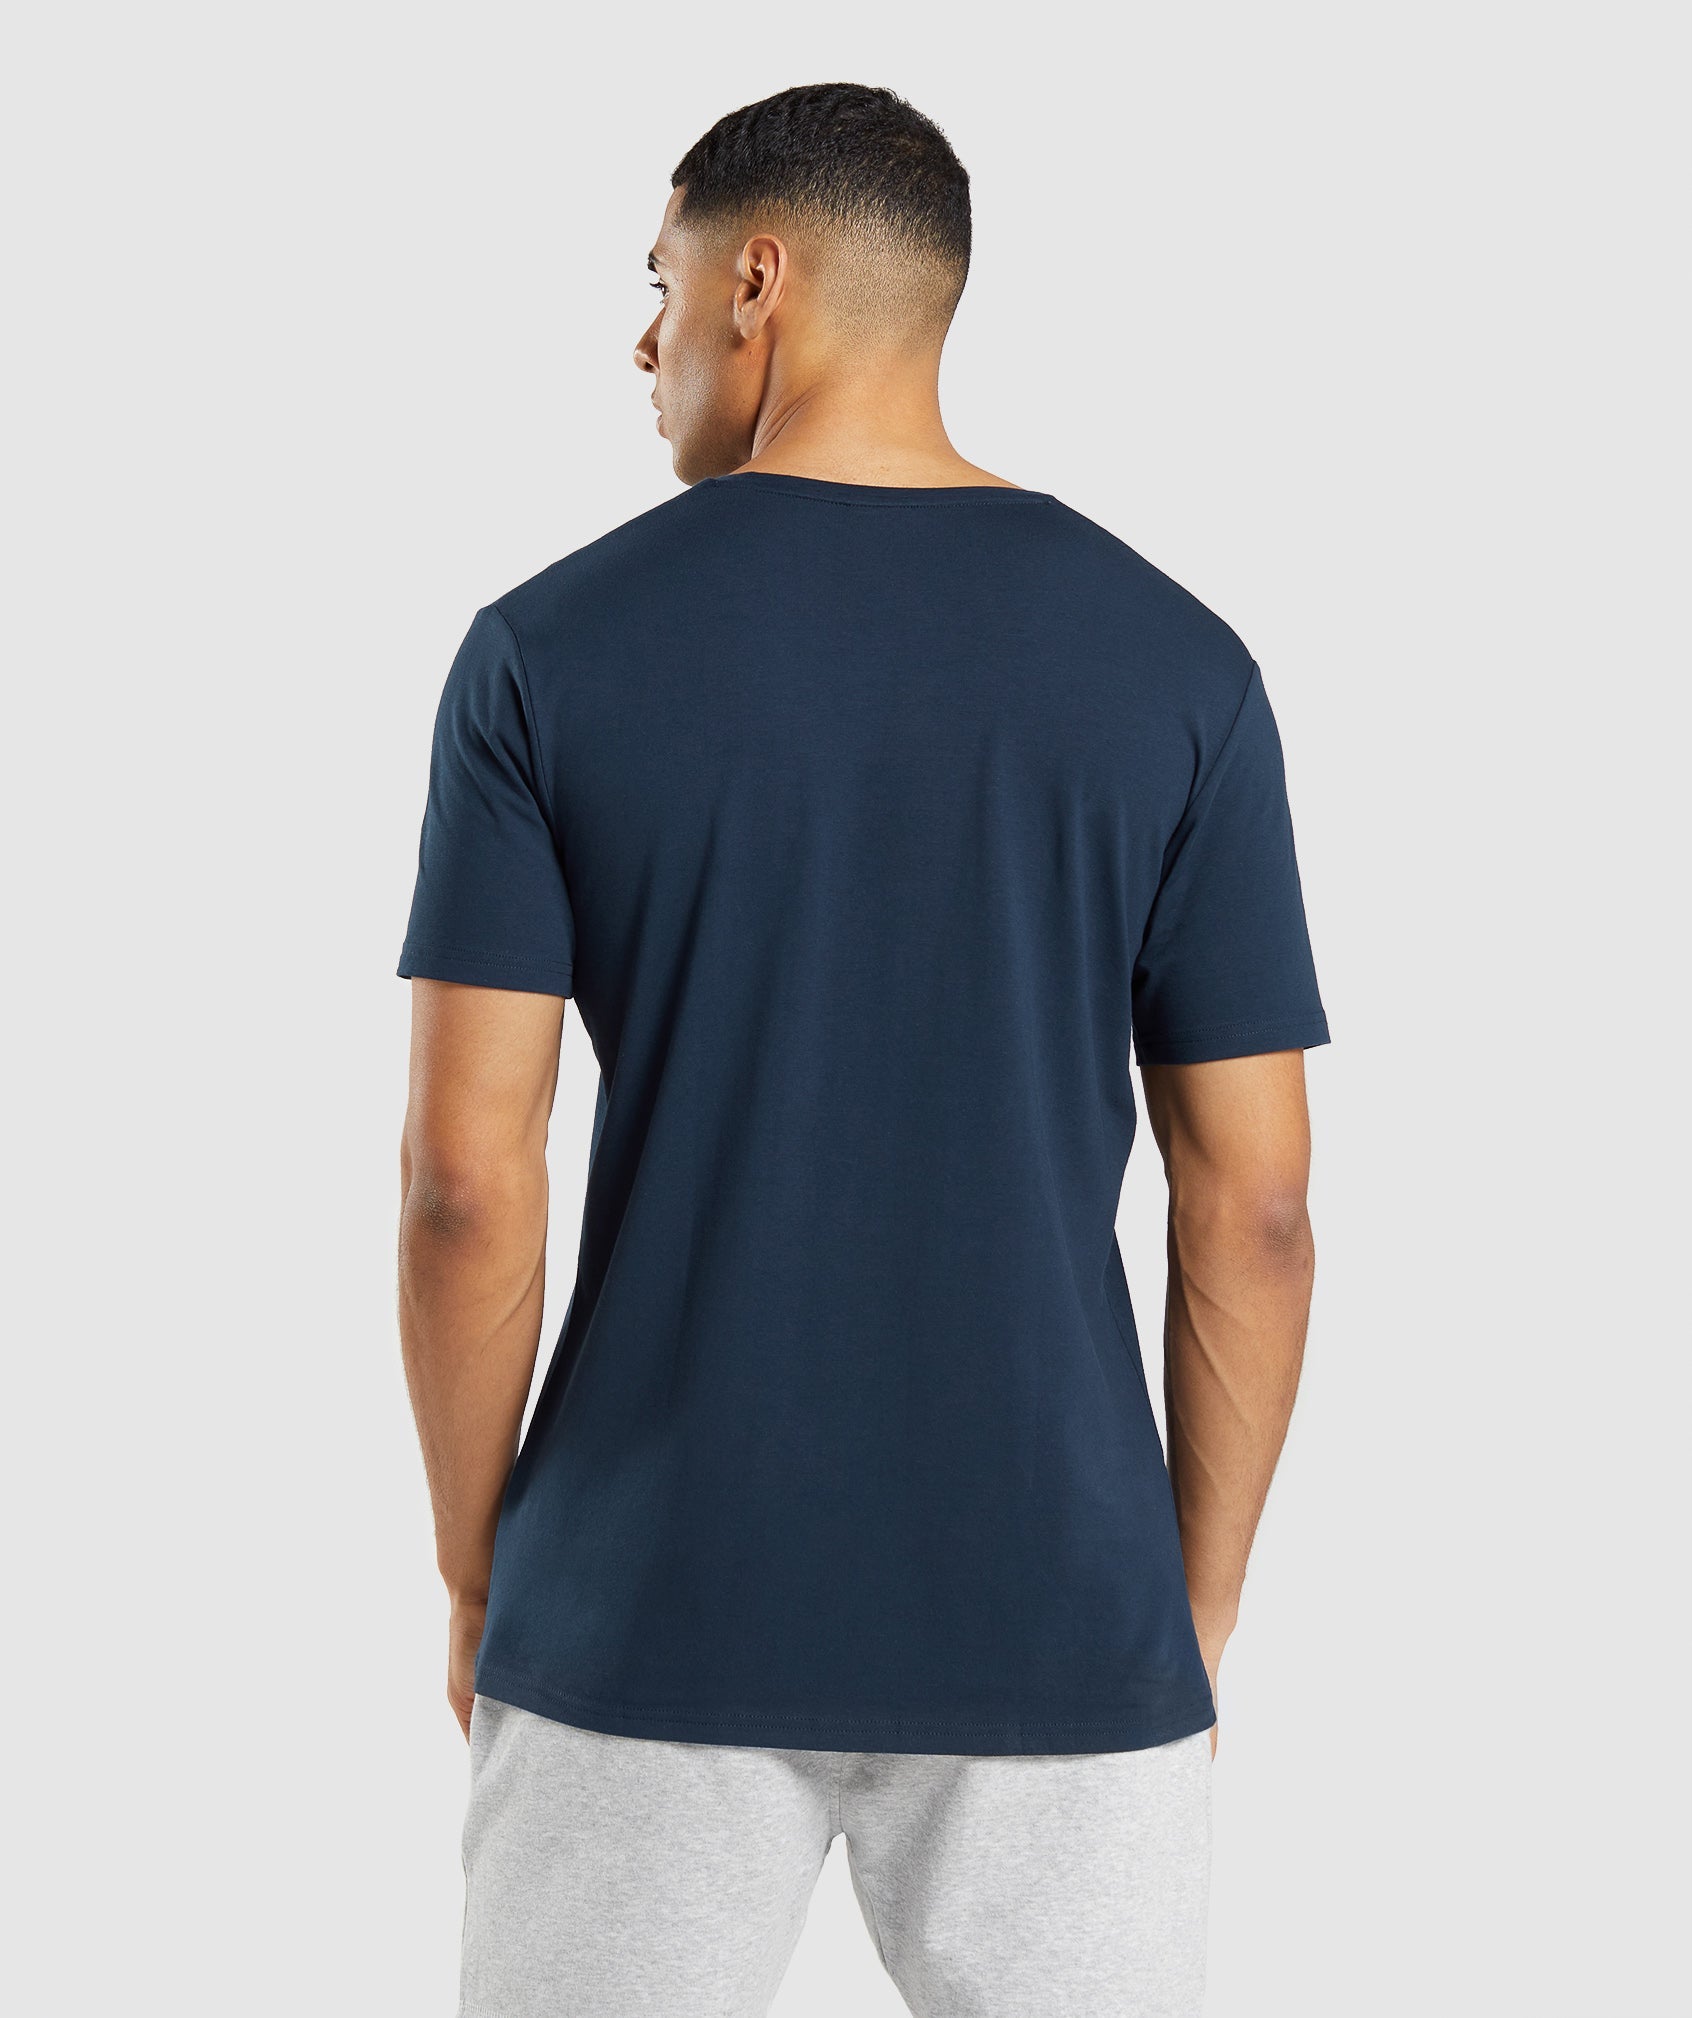 Essential T-Shirt in Navy - view 2